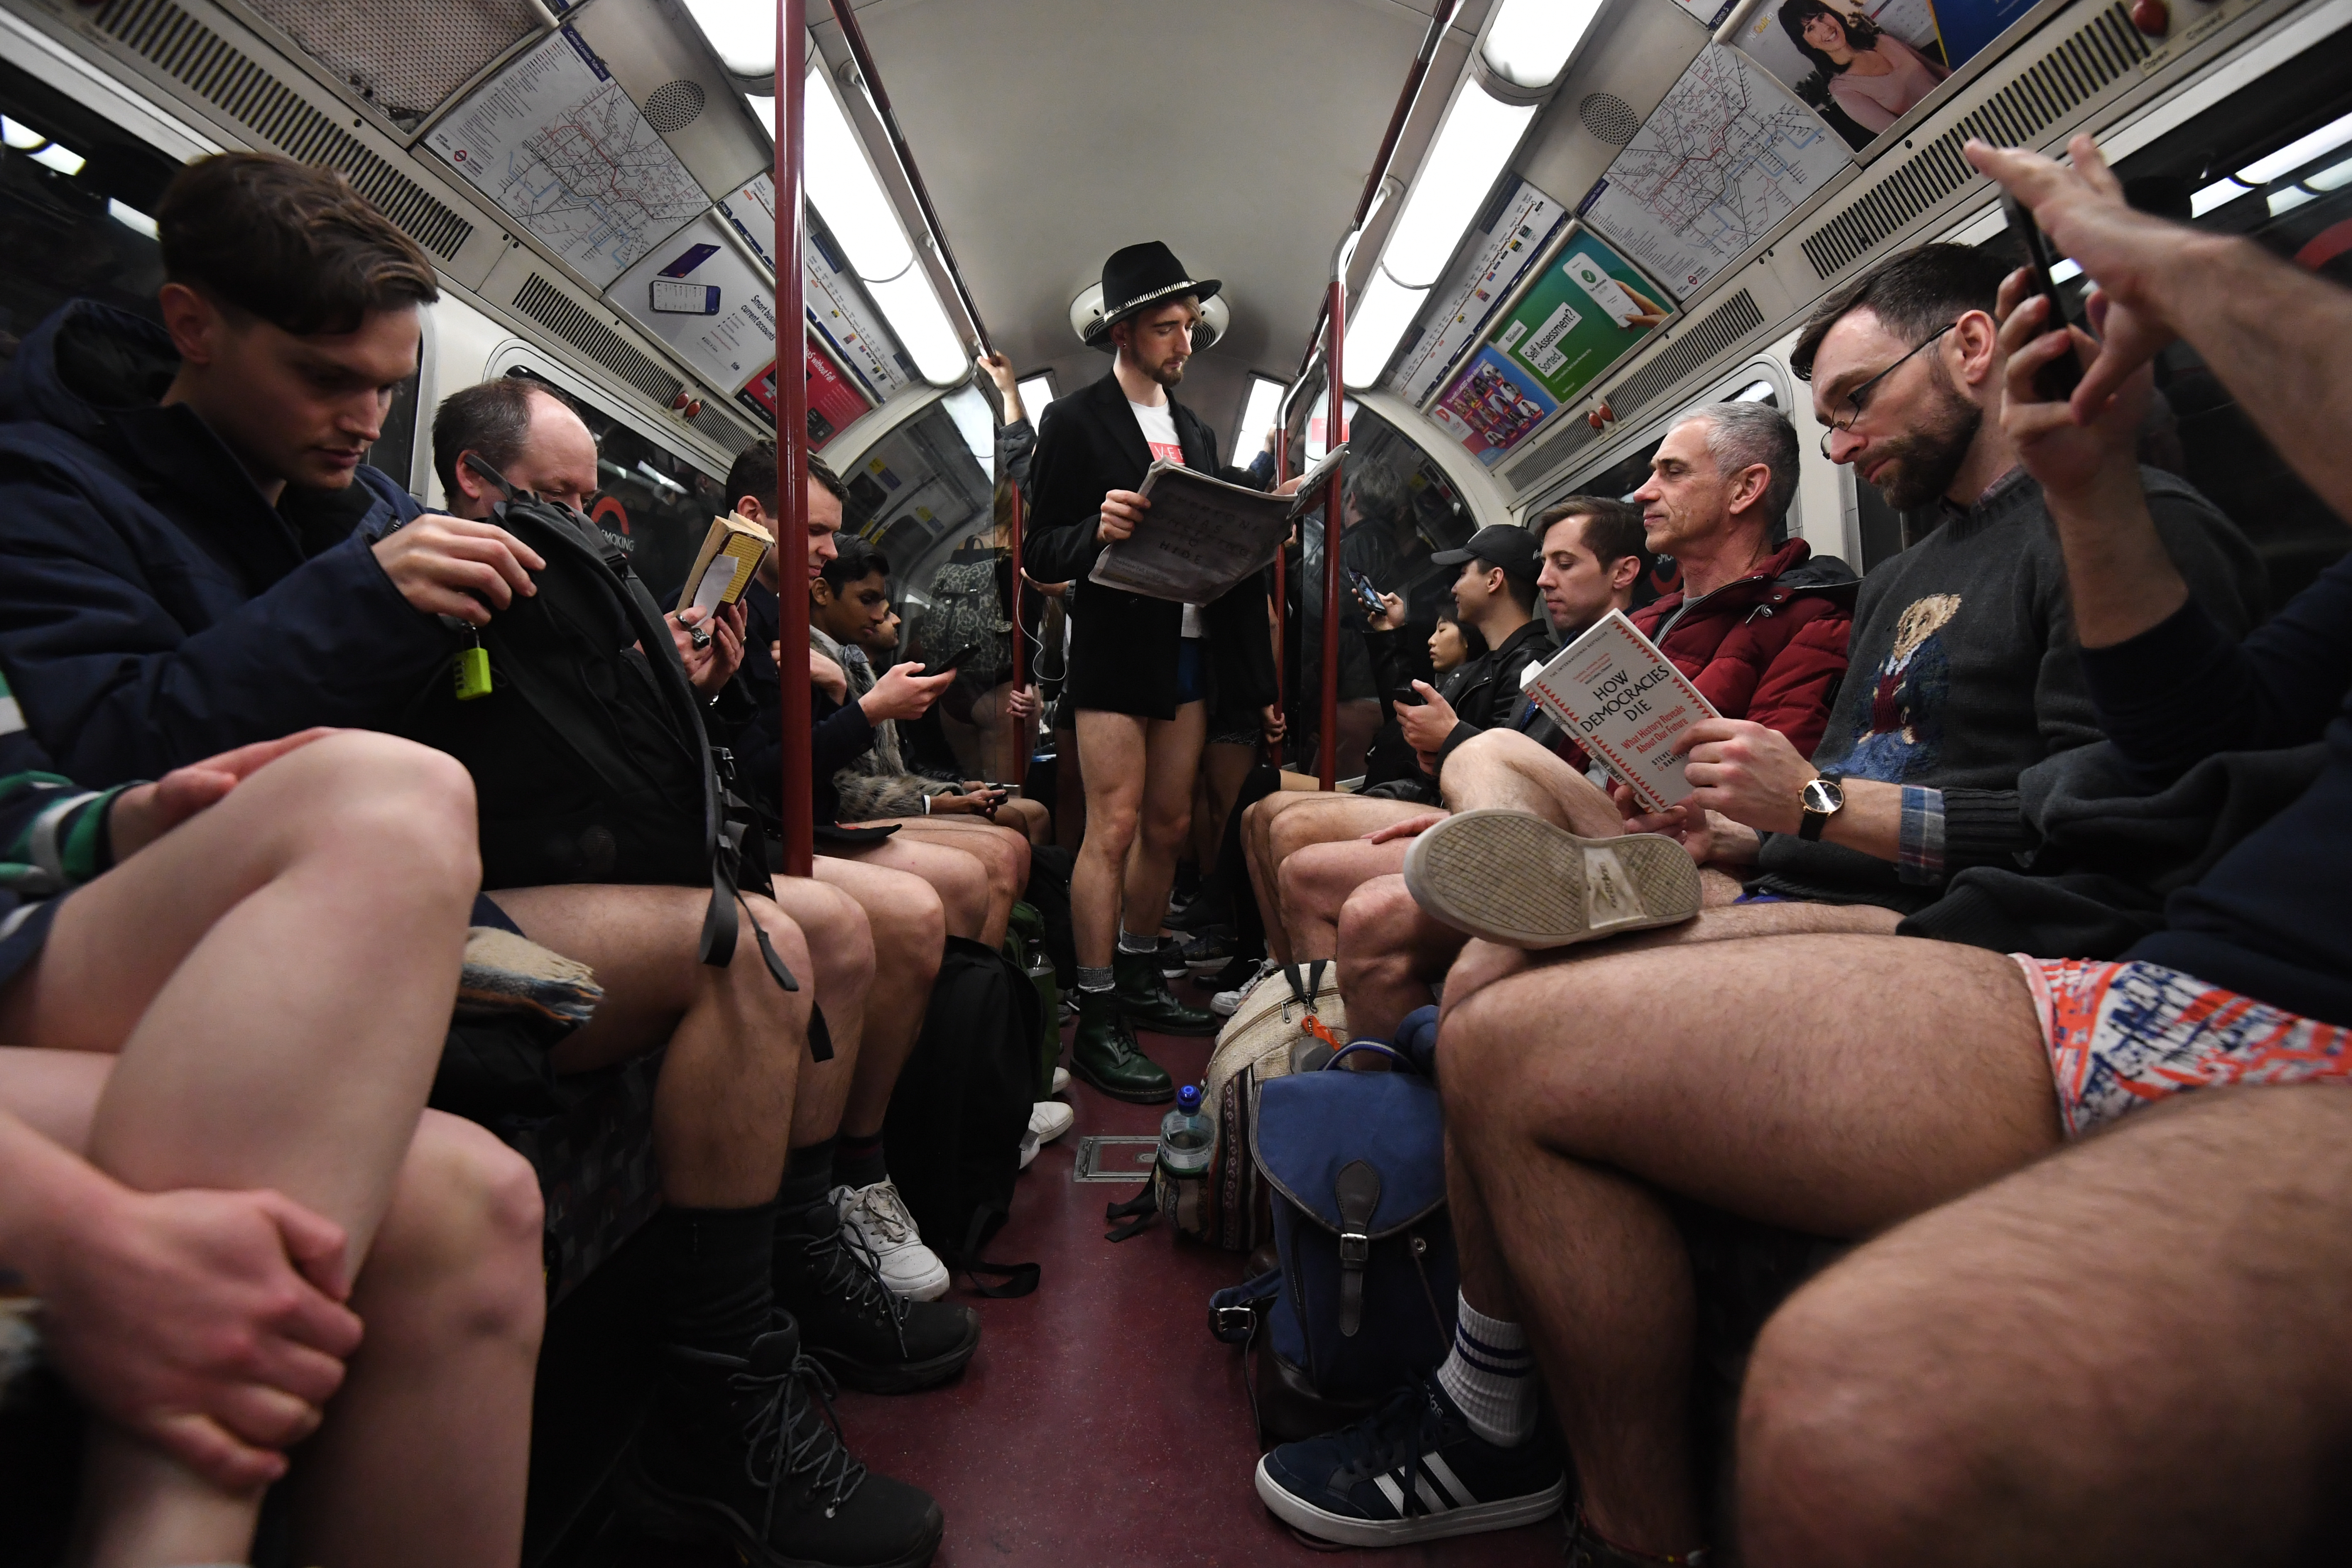 People riding the tube as they take part in the 11th annual No Trousers Tube Ride in London.